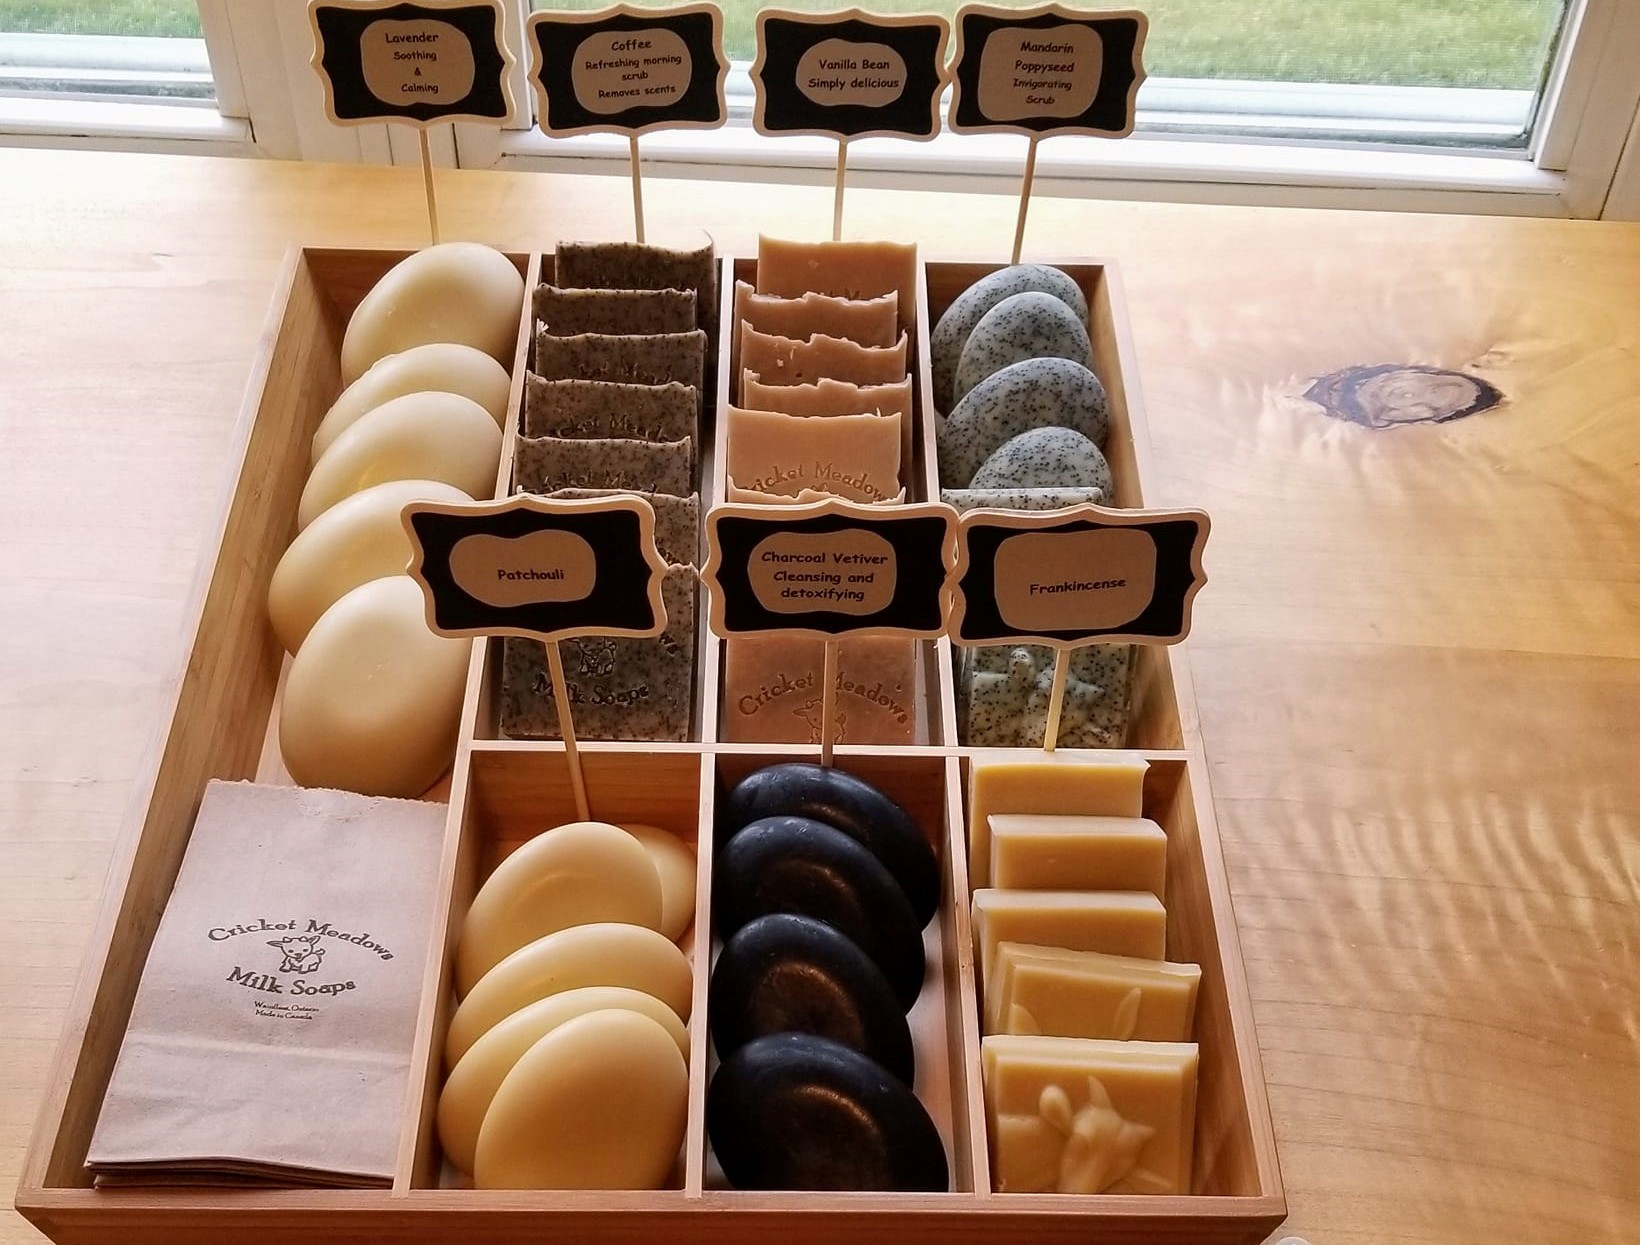 Cricket Meadows Farms assorted soaps